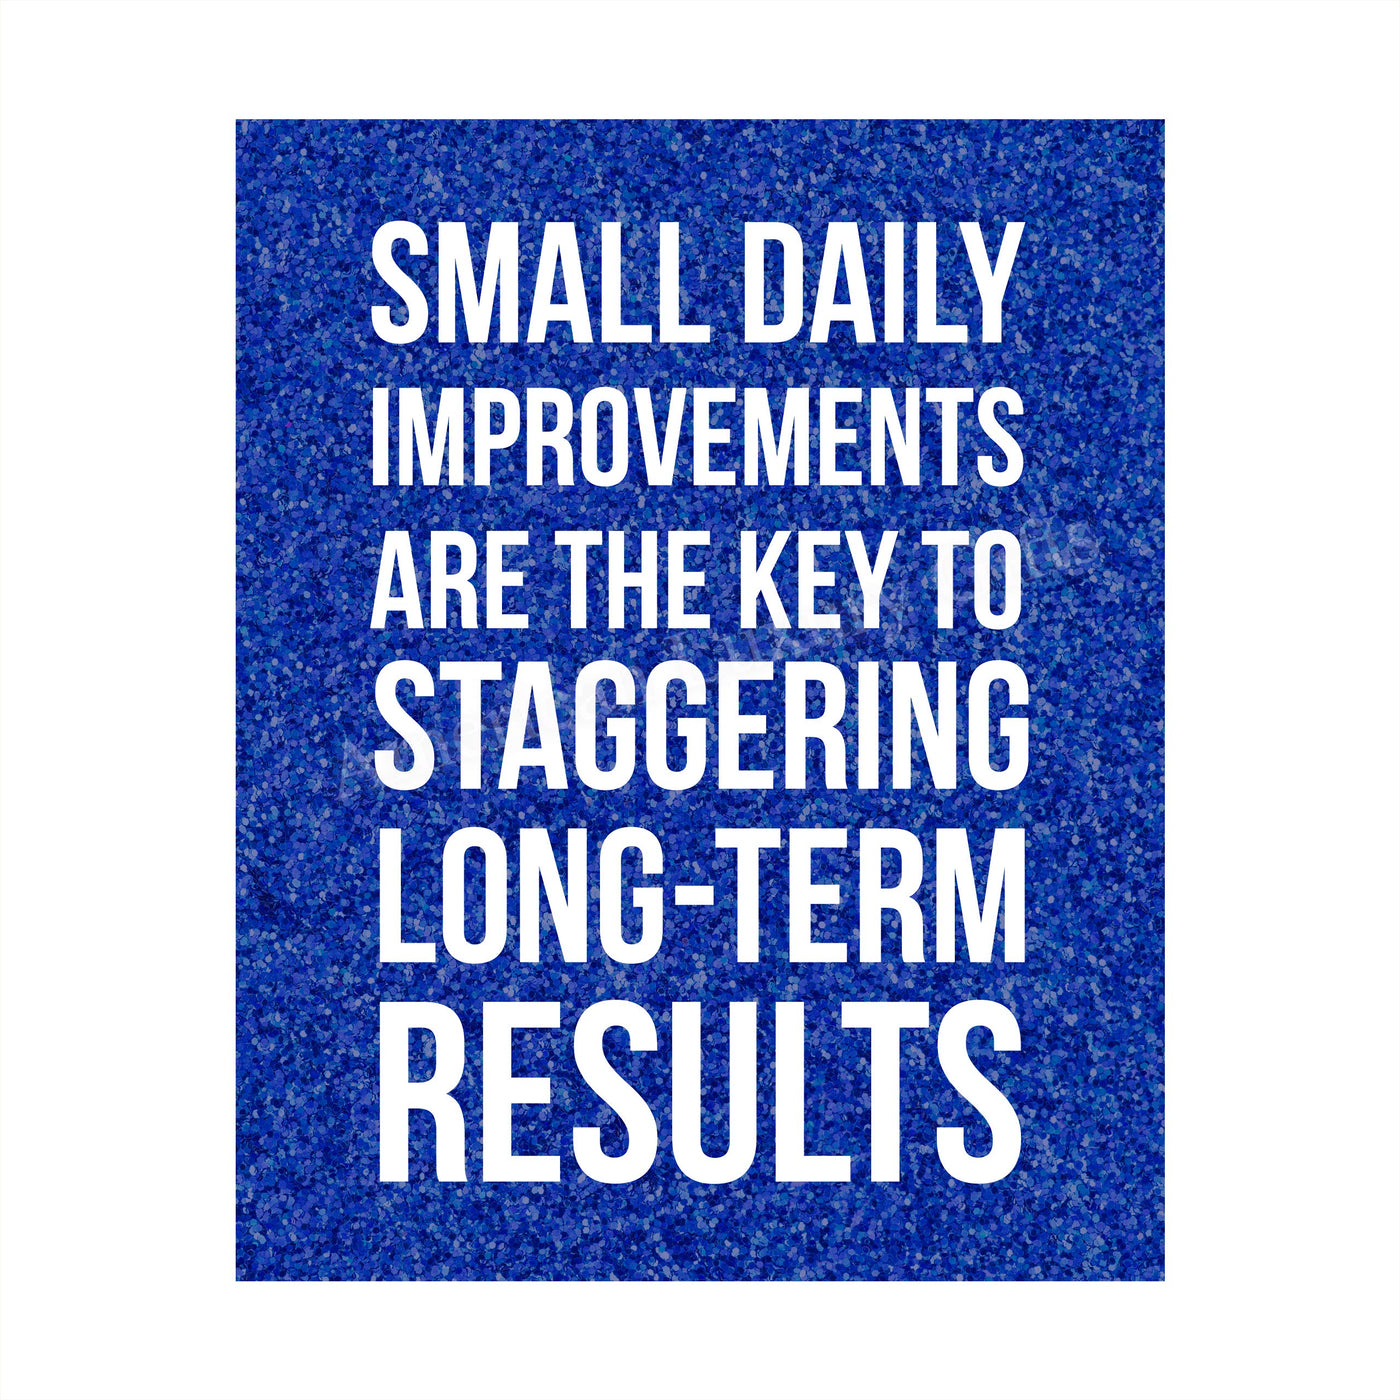 ?Small Daily Improvements-Key To Long-Term Results? Motivational Quotes Wall Art -8 x 10" Modern Poster Print-Ready to Frame. Inspirational Home-Office-School-Gym Decor. Great Sign for Motivation!